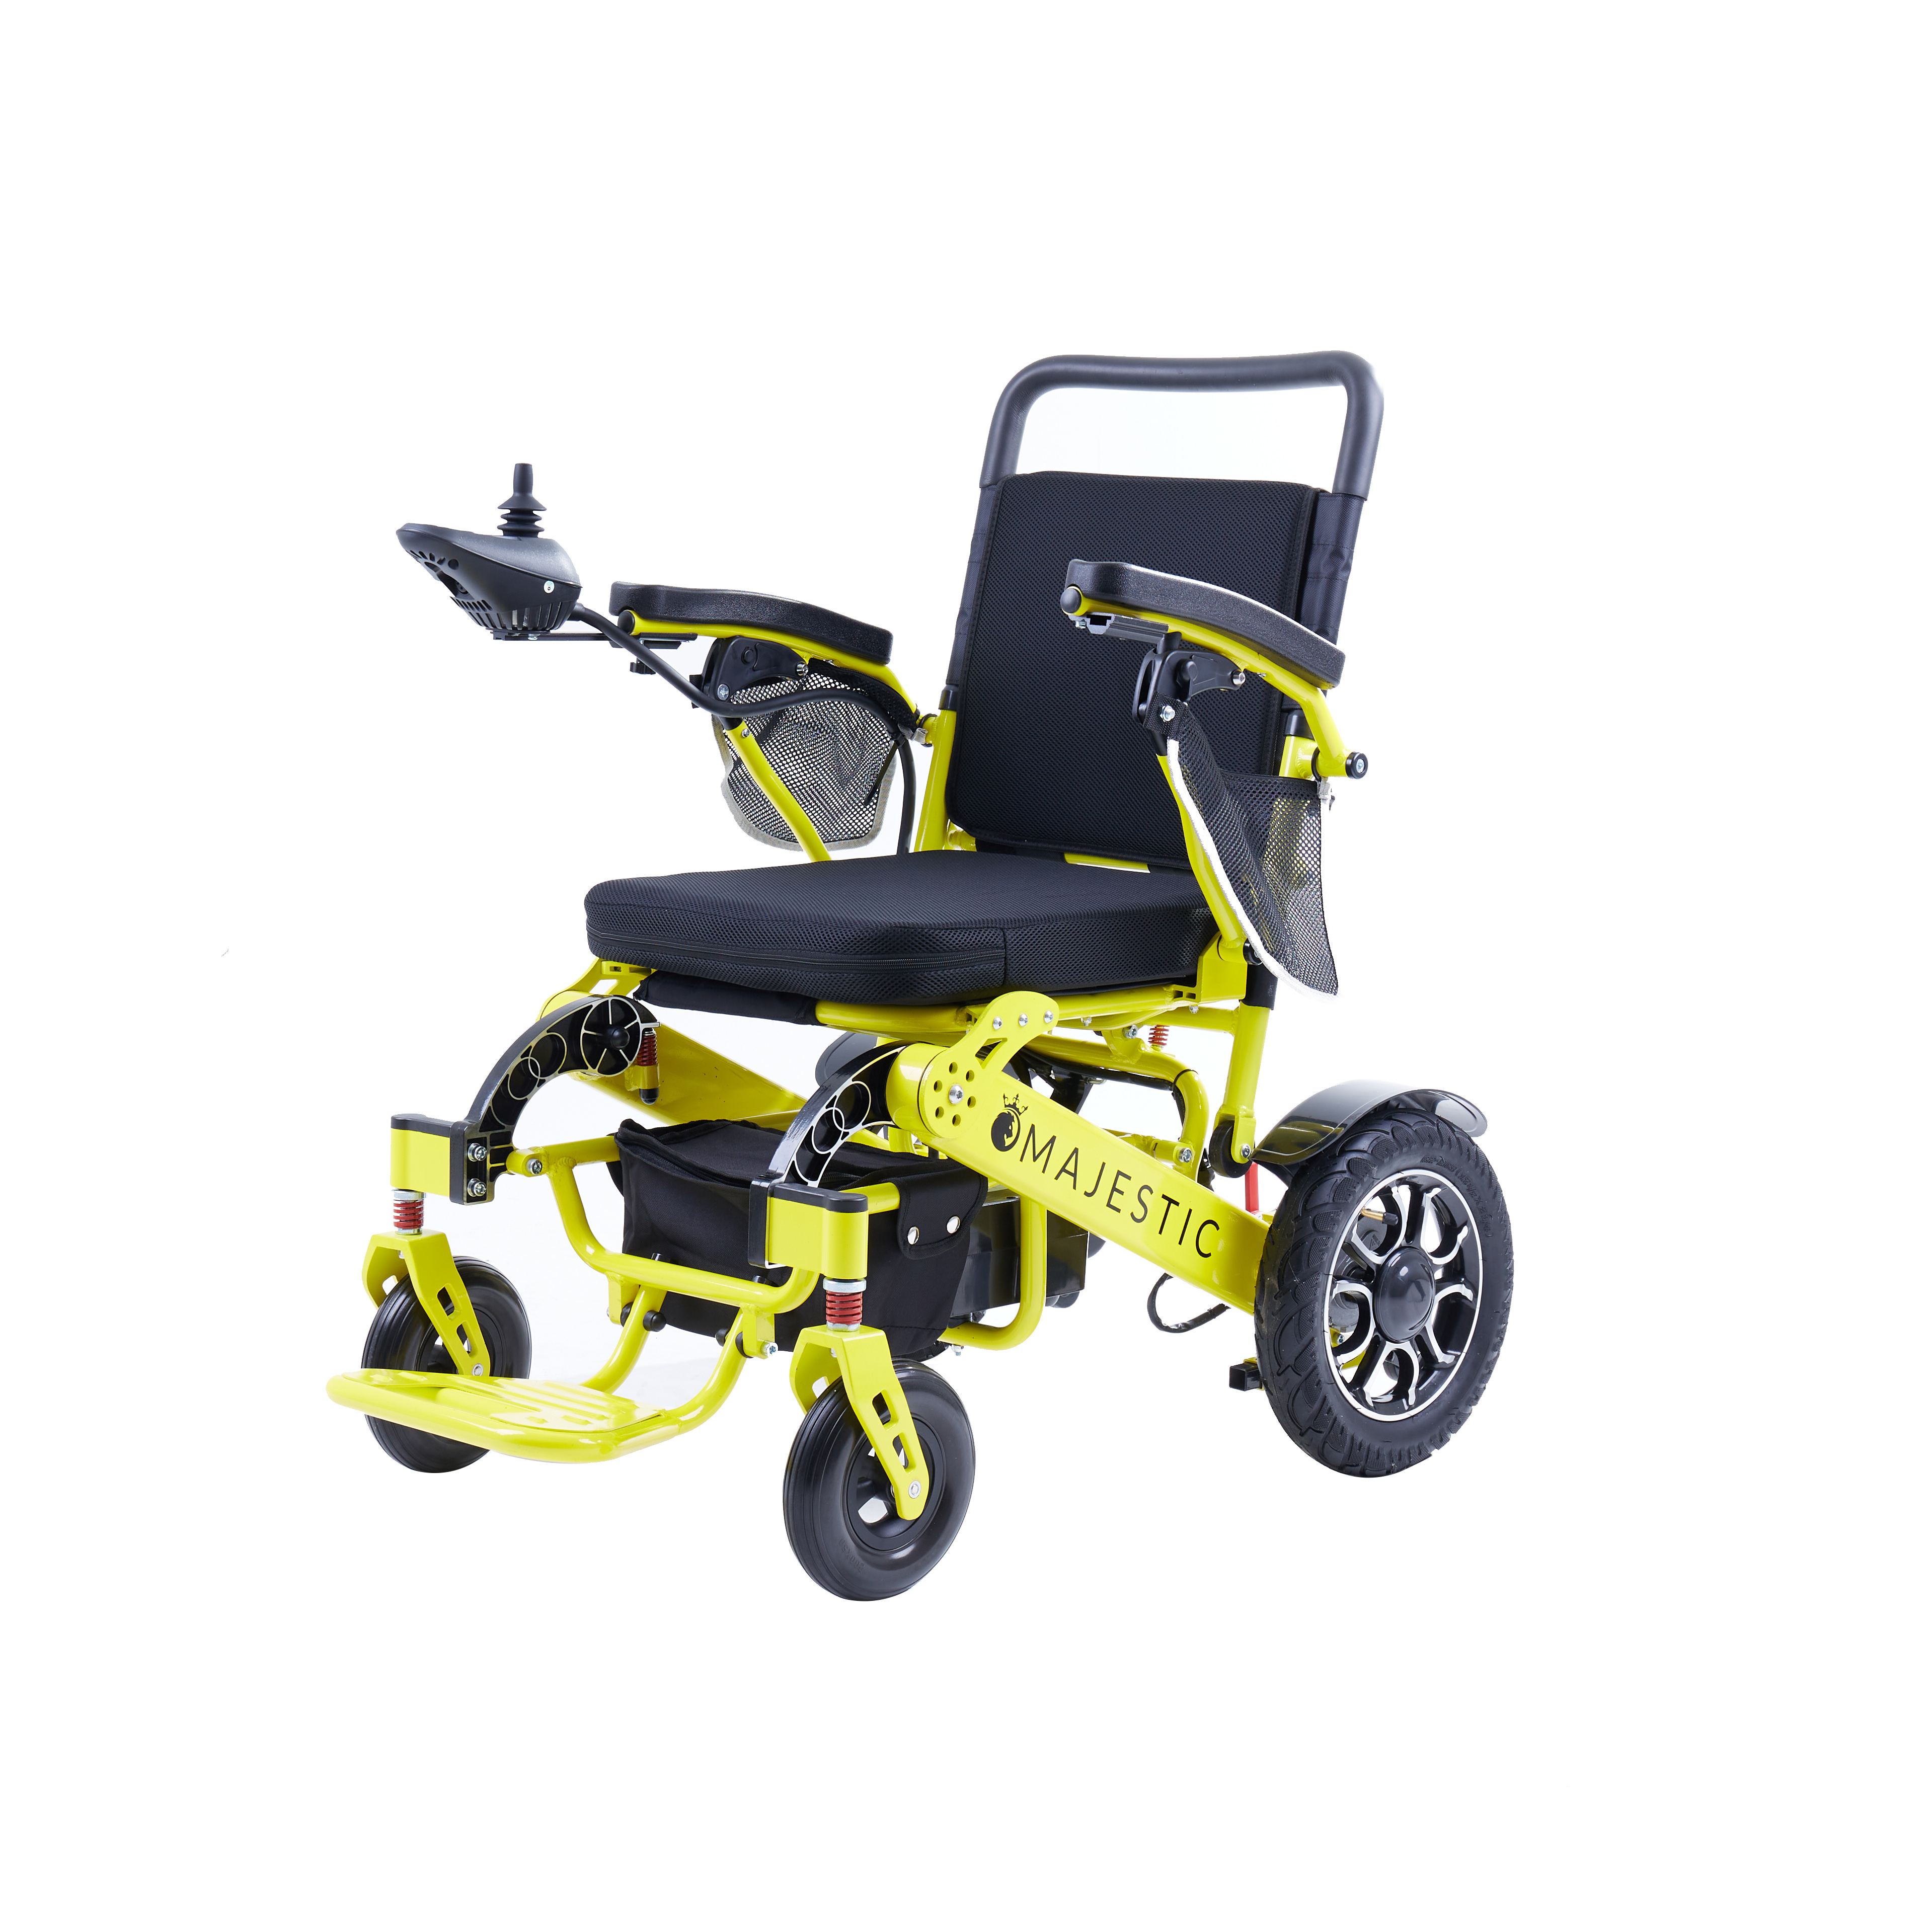 Txwj Laug thiab Disabled Lightweight Mobility Aid Motorized Folding Electric Power Wheelchair